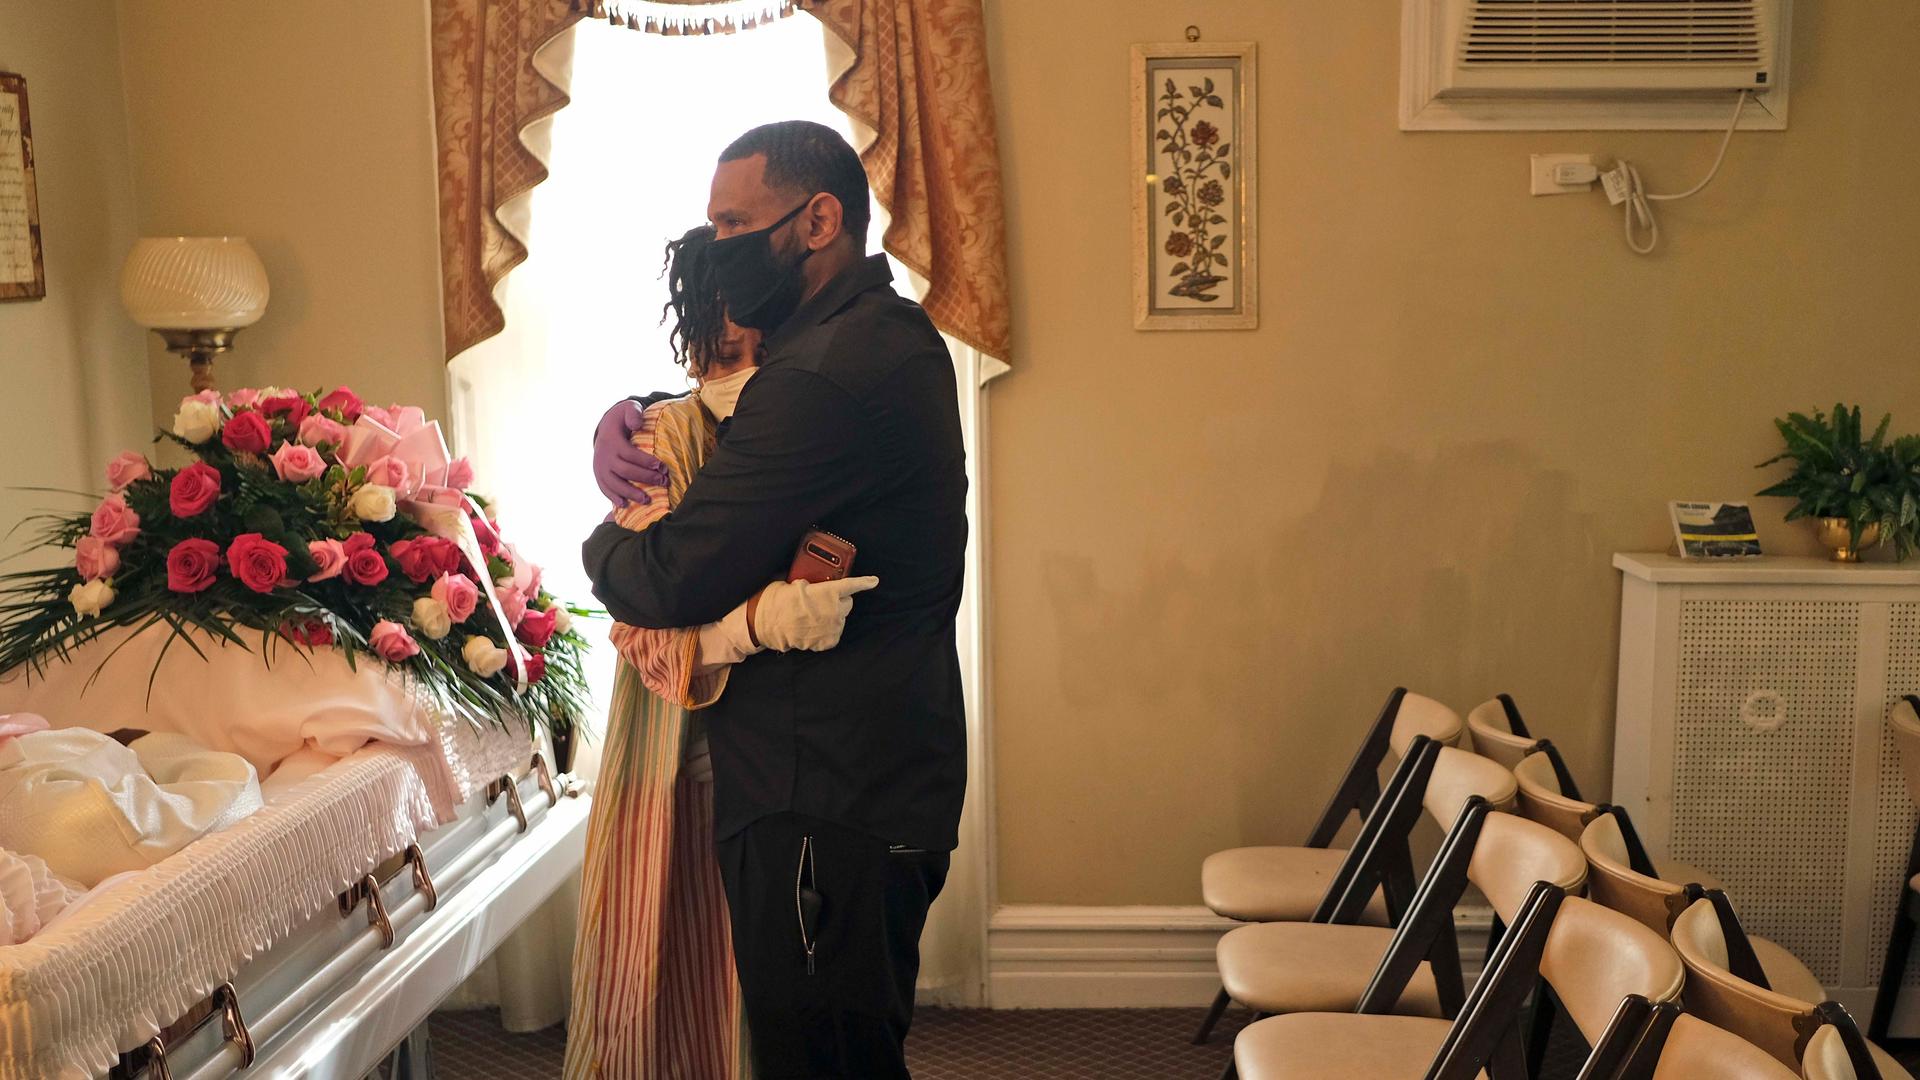 Siblings Erika and Dwayne Bermudez comfort one another during a short viewing of their mother, Eudiana Smith, at The Family Funeral Home, May 2, 2020, in Newark, New Jersey. 